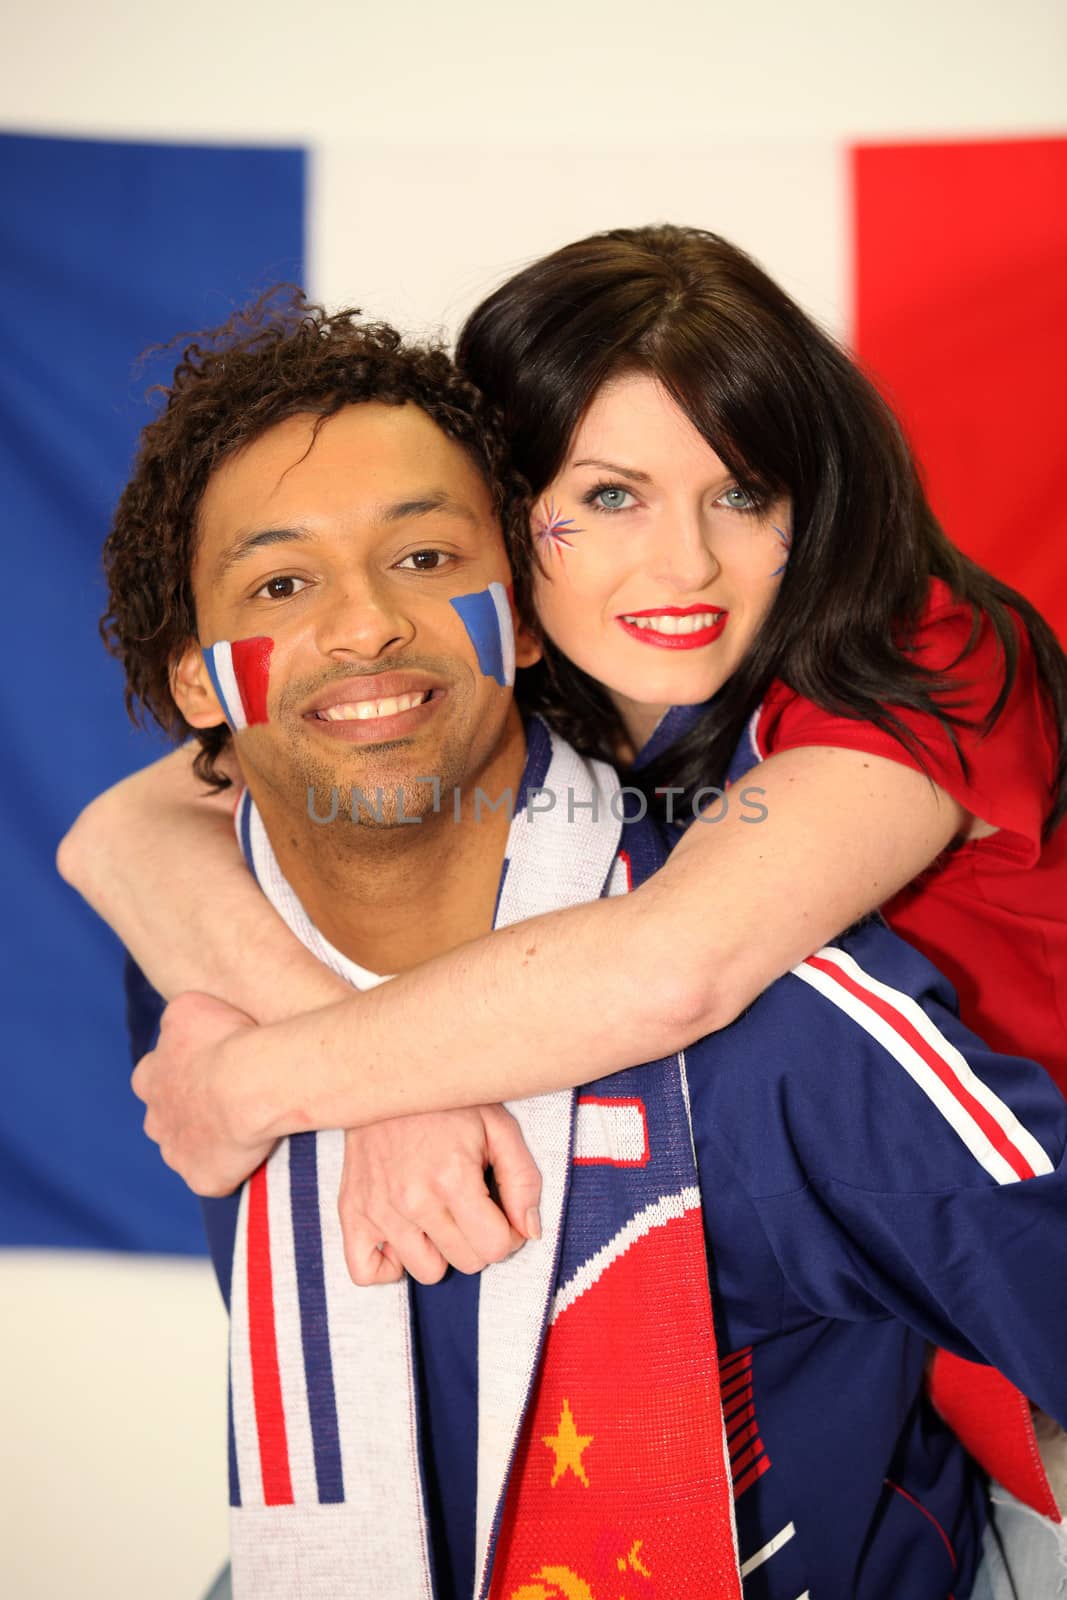 Couple of French supporters